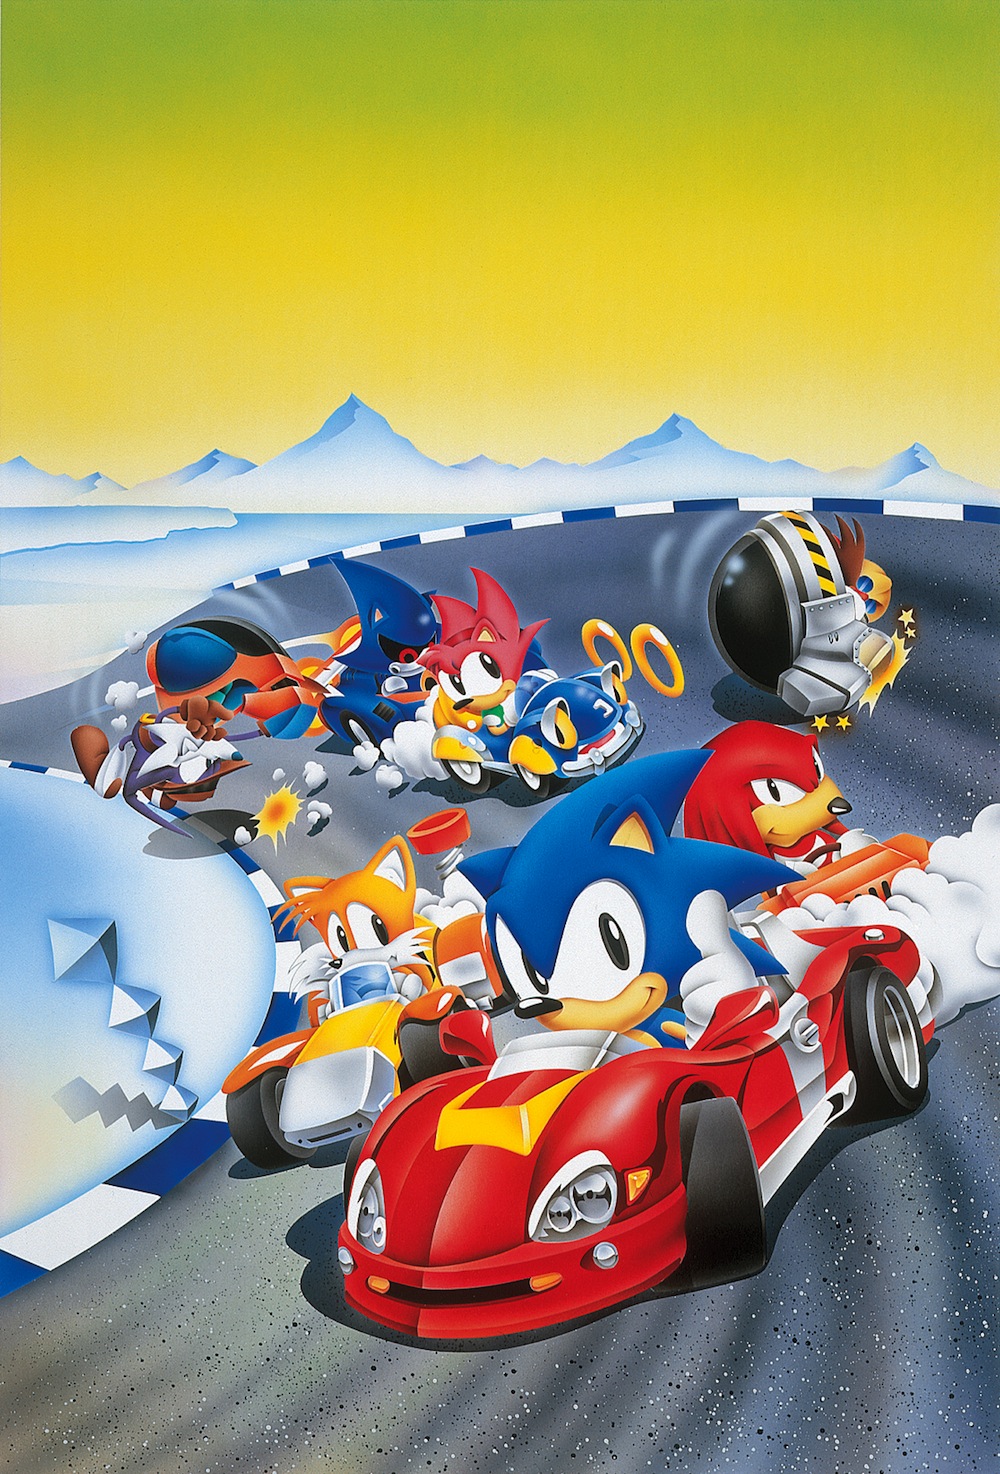 New Ratings Suggest Sonic Drift 2 Finally Coming Overseas to 3DS eShop